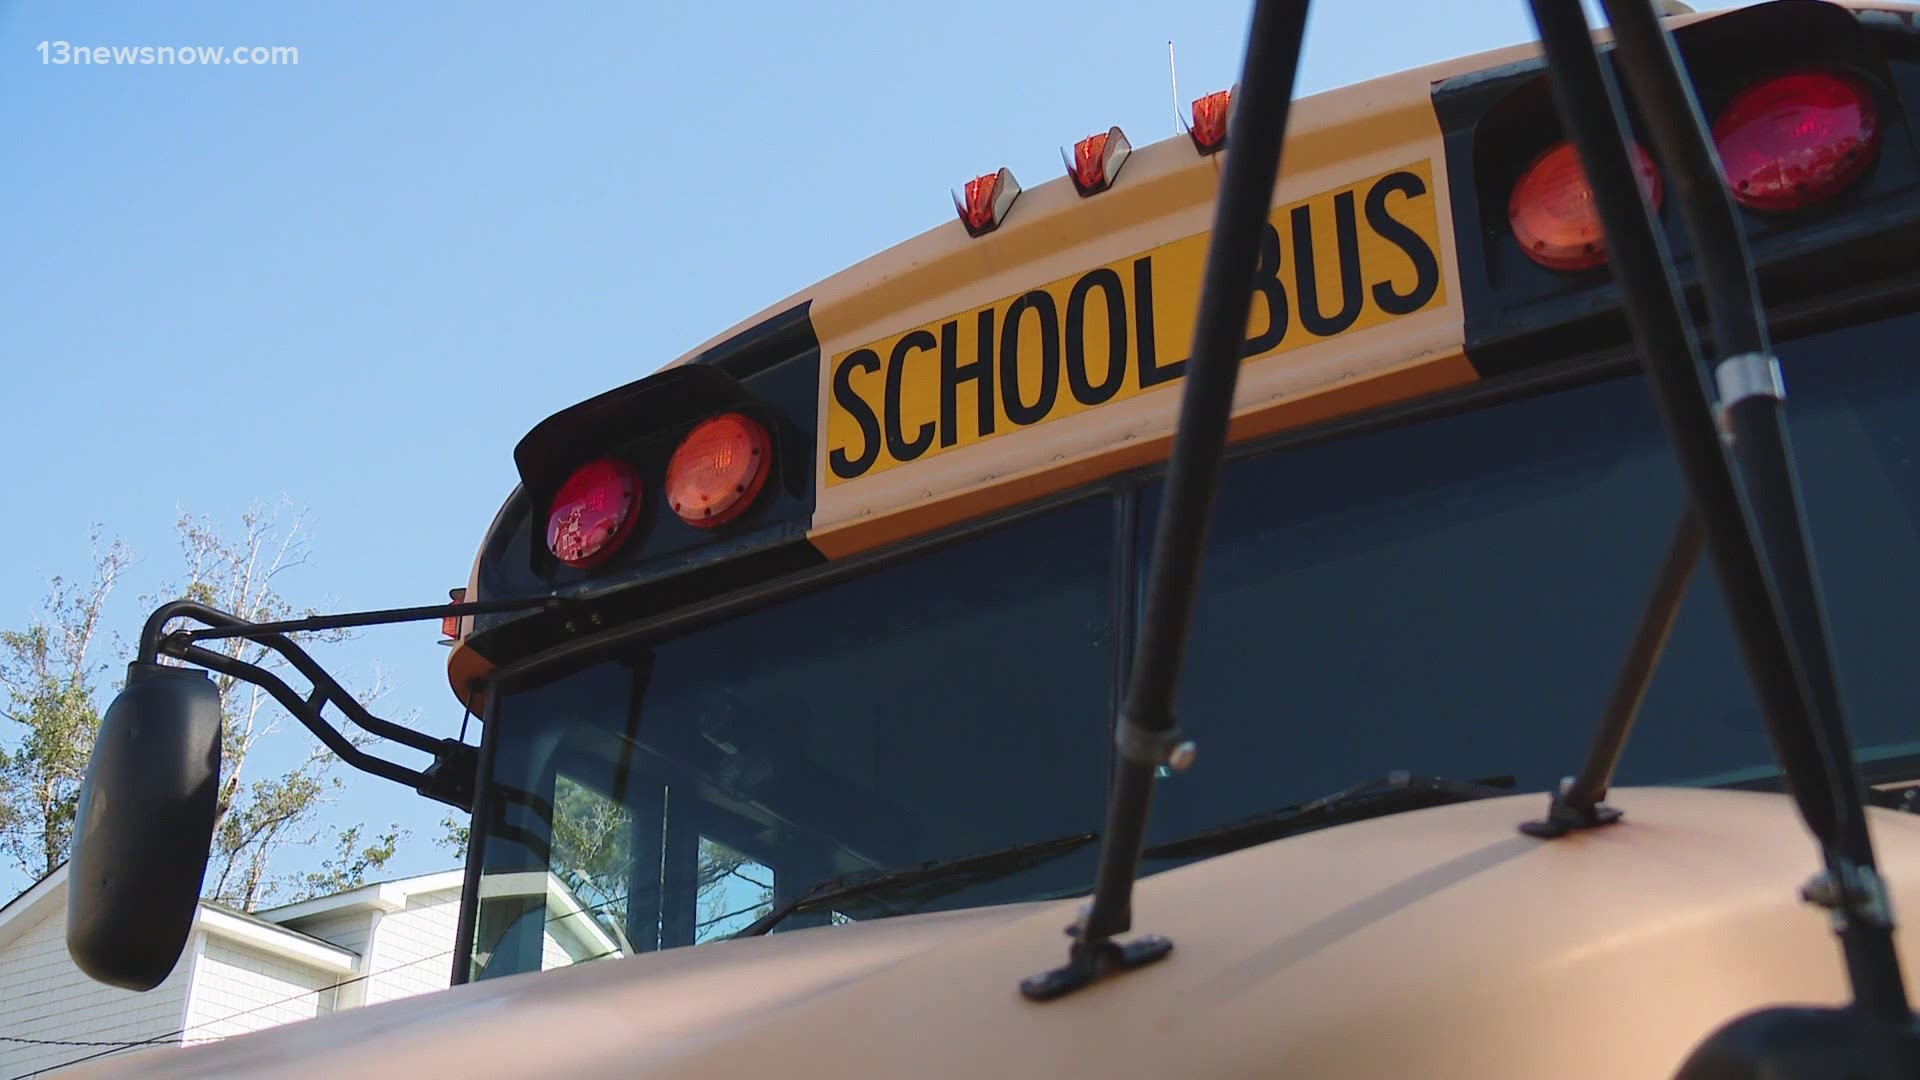 13News Now Megan Shinn has the latest on reports about a person on a Virginia Beach school bus who tested positive for the novel coronavirus.